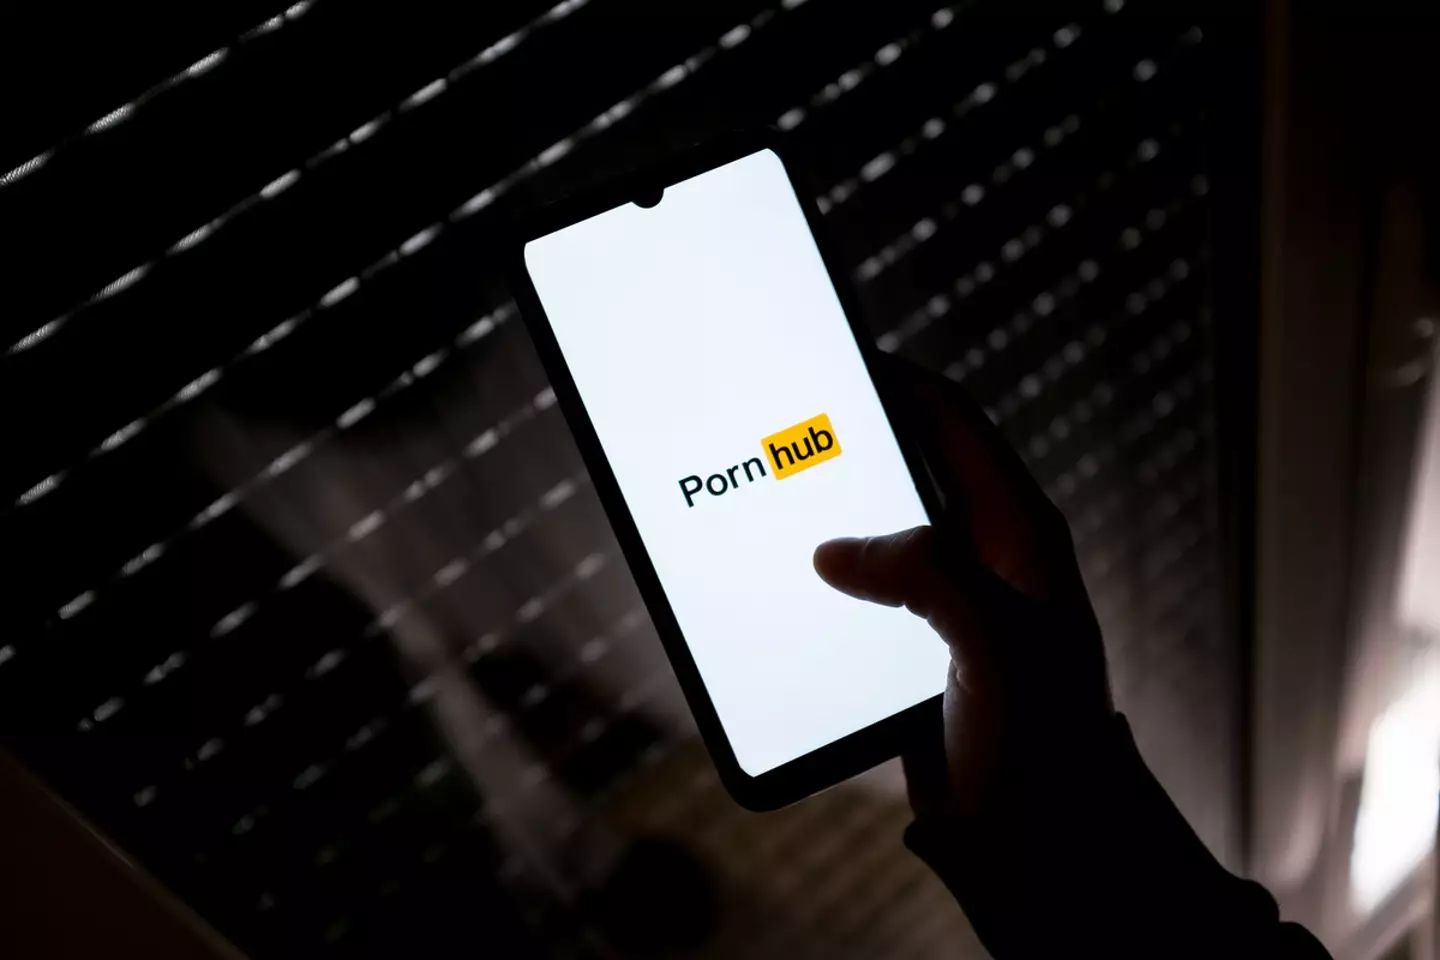 Pornhub was the most popular site with Brits.